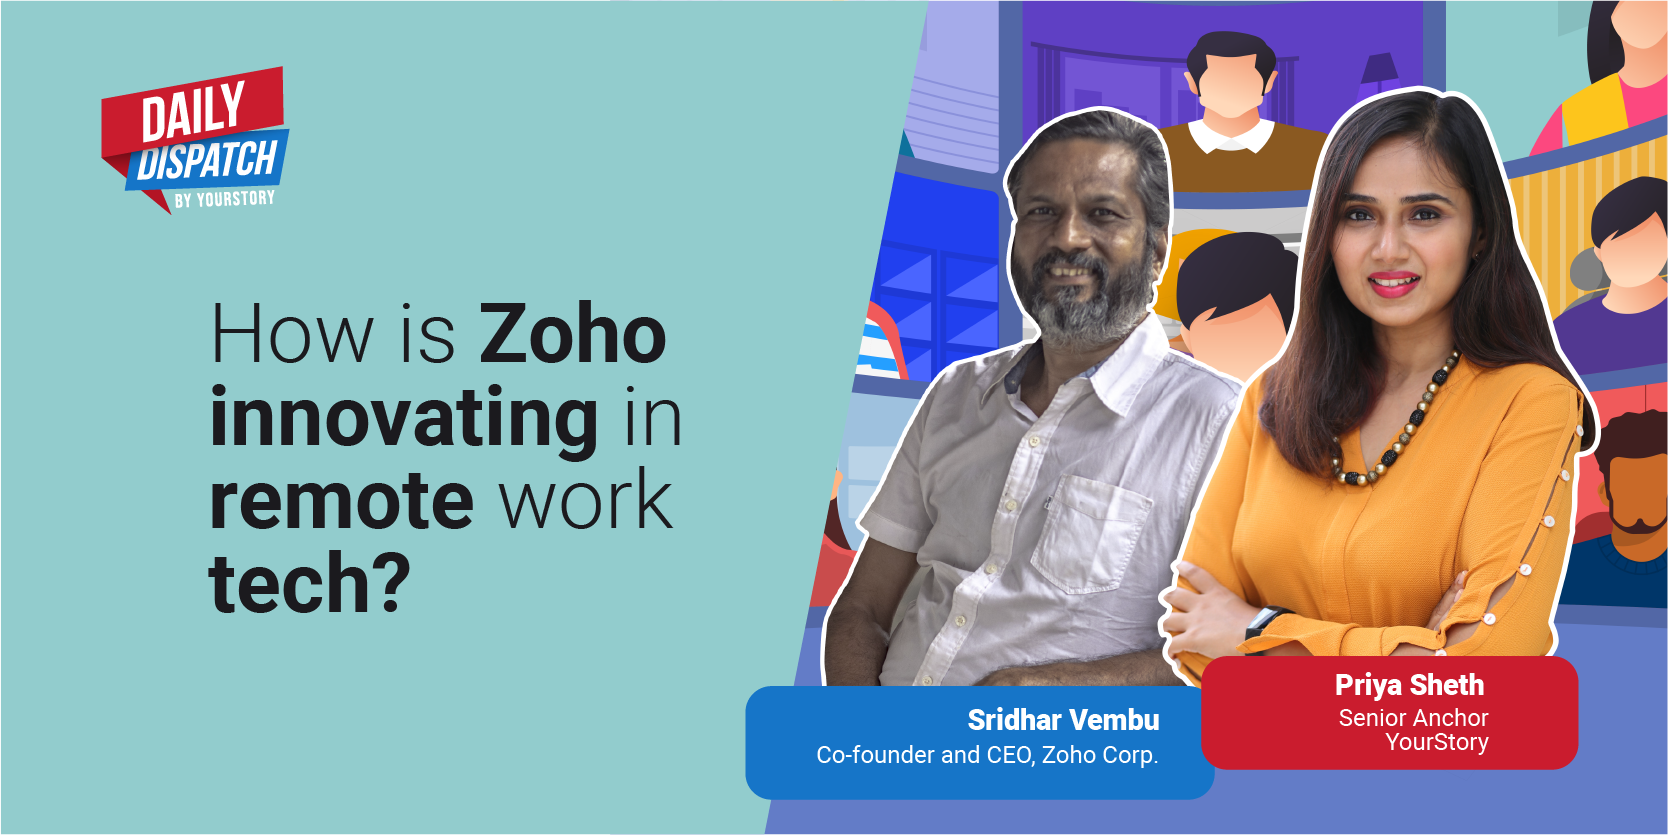 How Sridhar Vembu is steering Zoho Corp to become one of the top technology players in the world